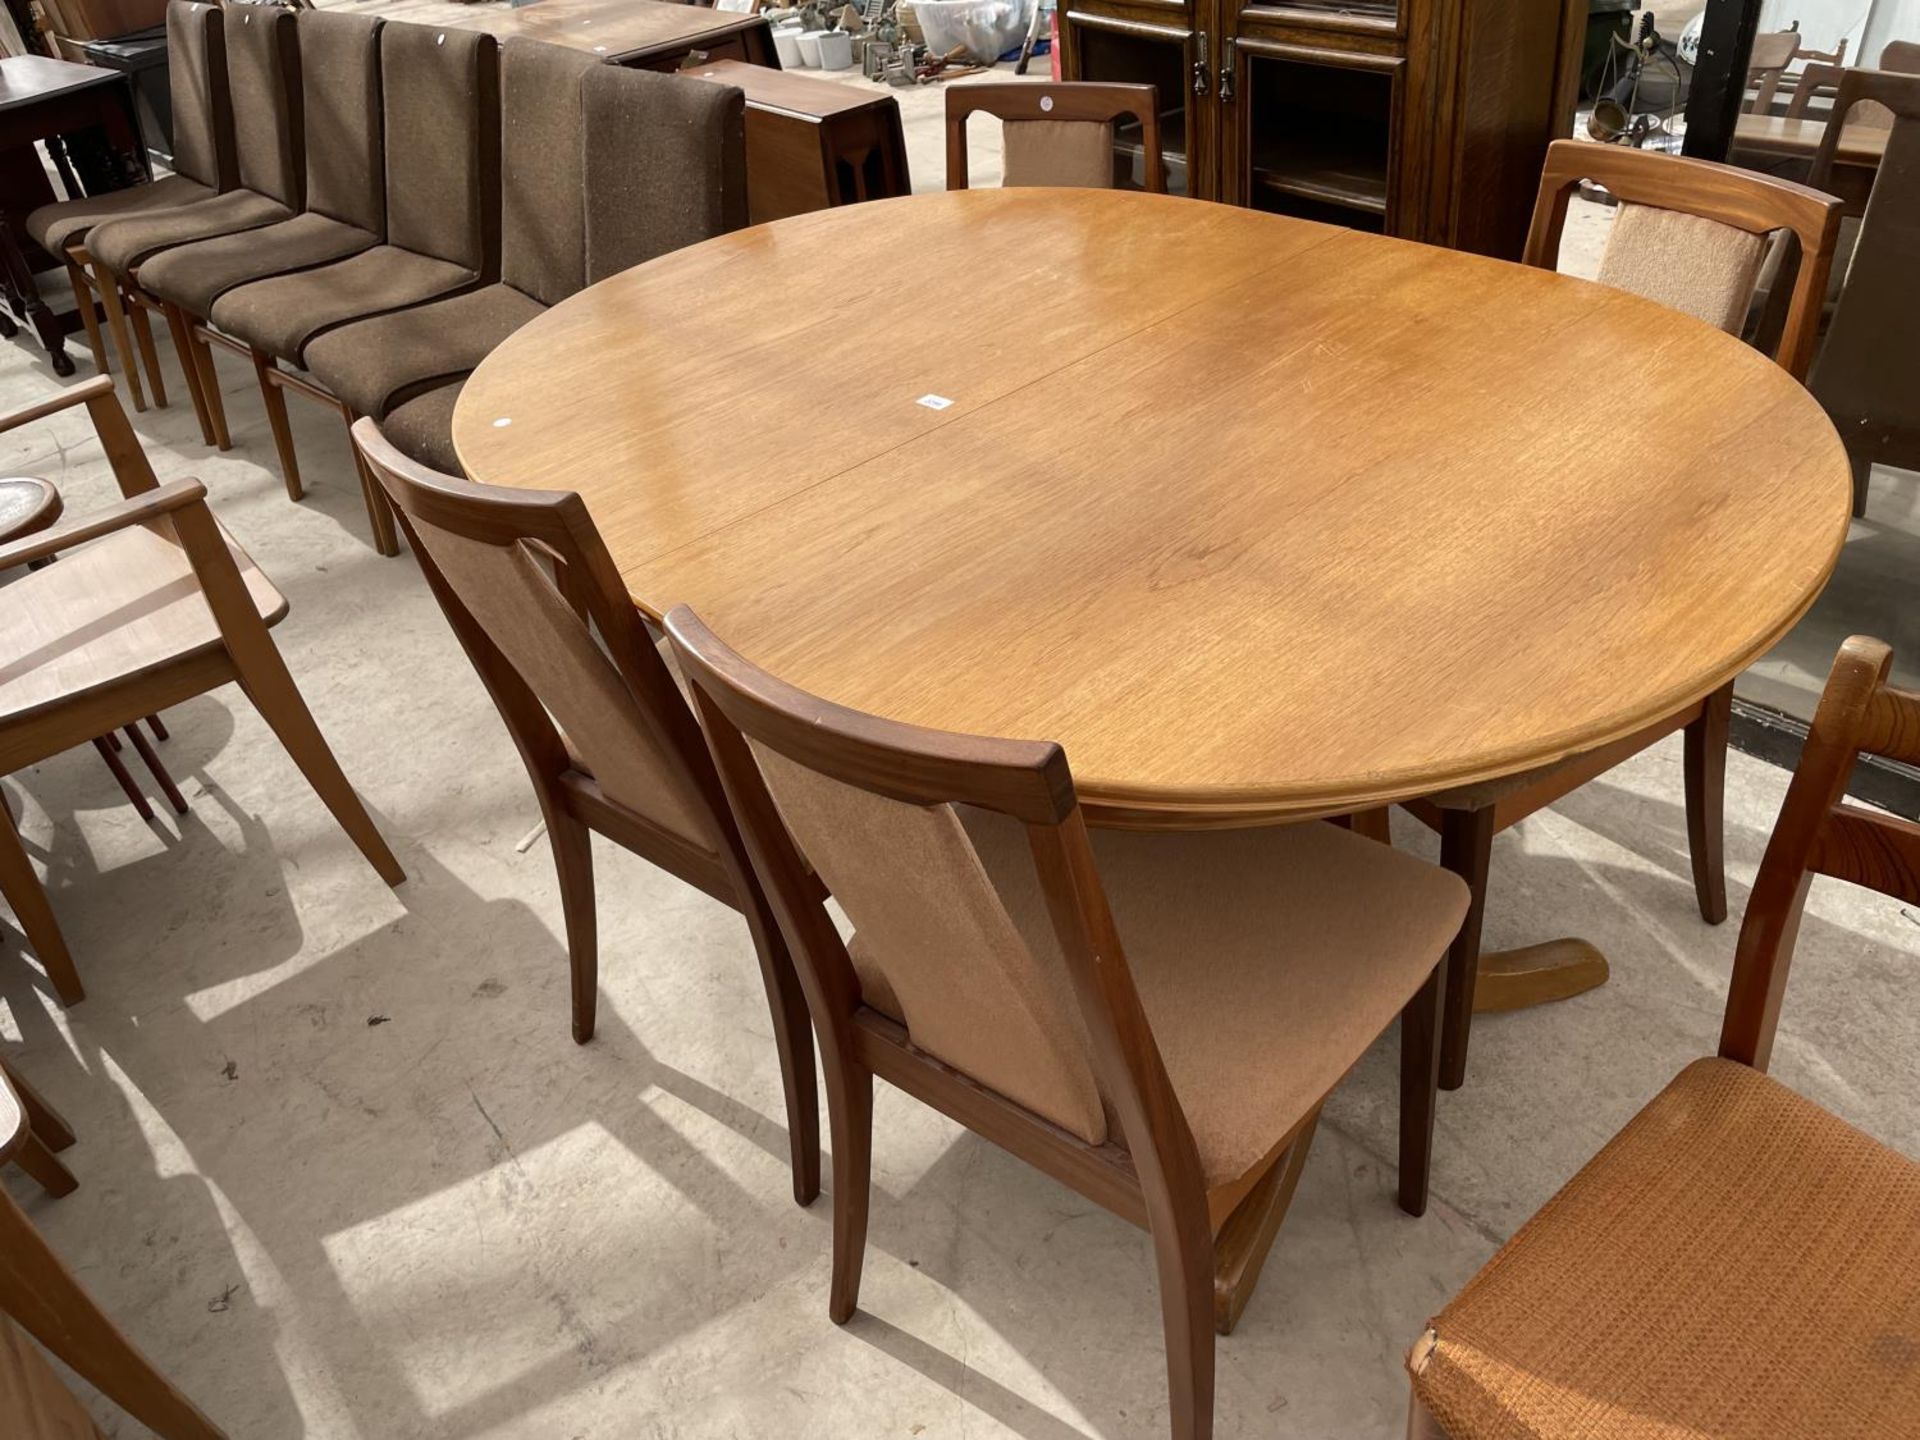 A RETRO TEAK EXTENDING DINING TABLE STAMPED S.FORM (JAMES.H.SUTCLIFFE & SON, LTD) AND FOUR G-PLAN